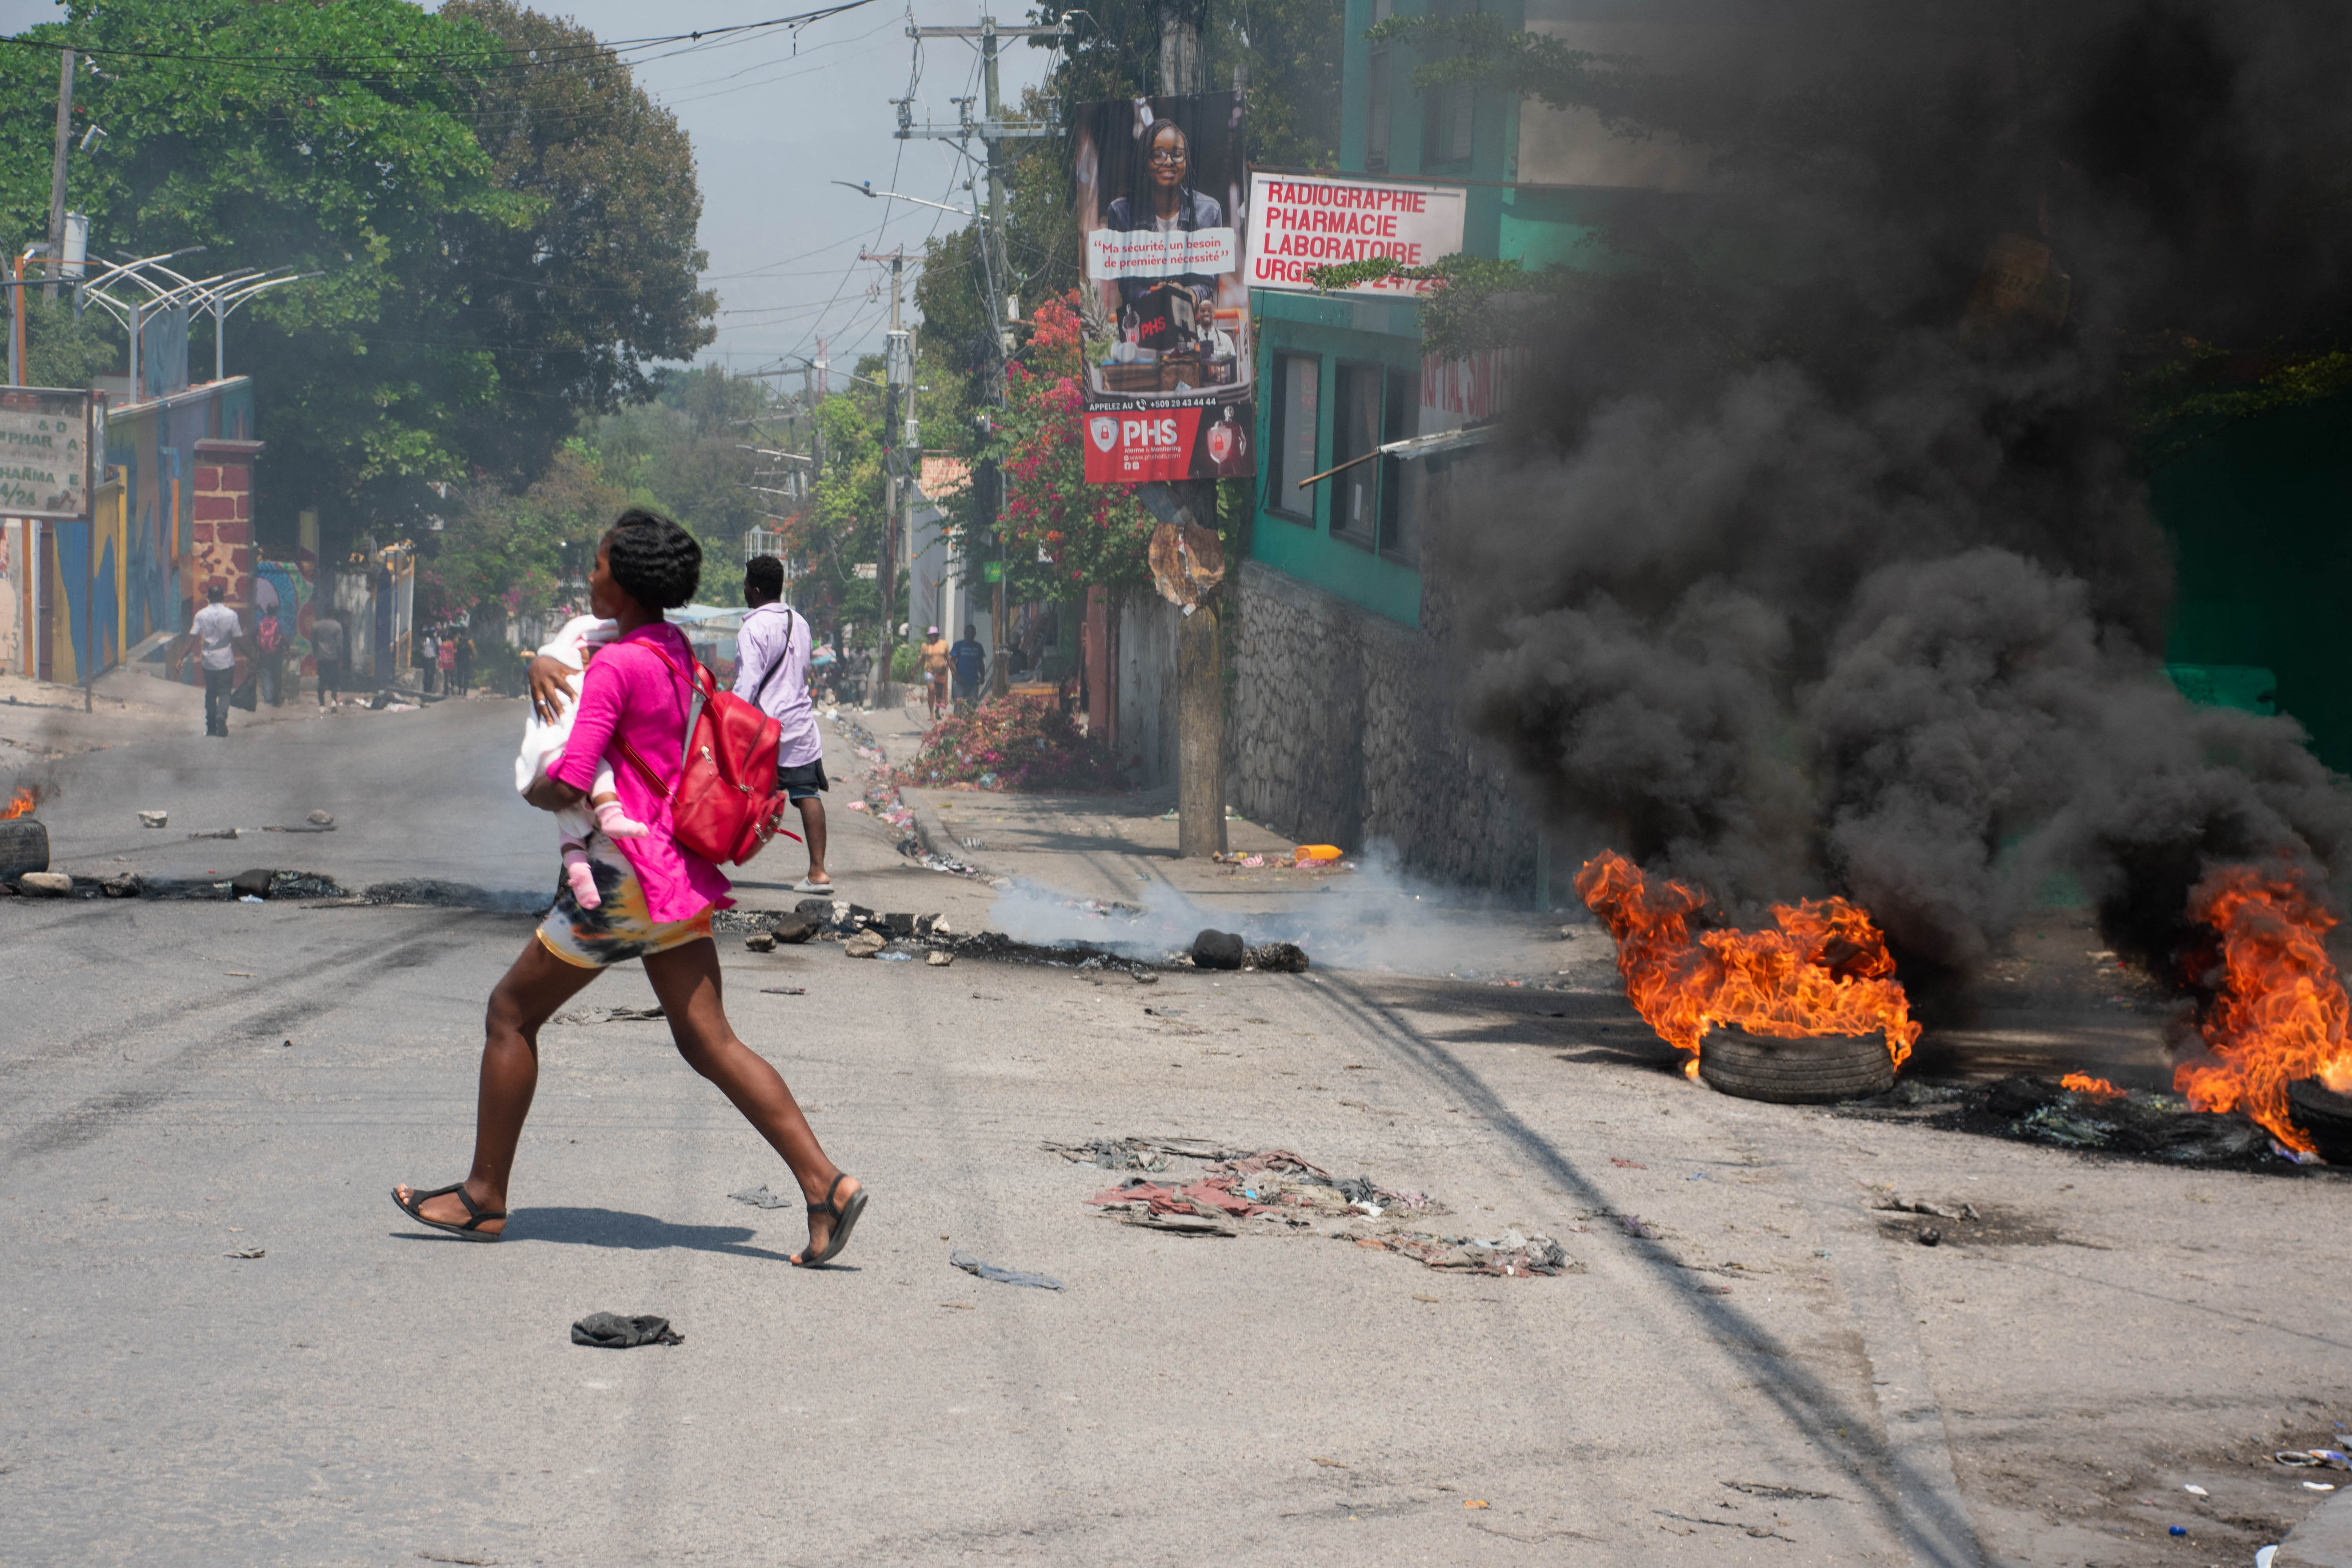 Haiti is barrelling towards the brink of collapse as gang leaders are believed to be gearing up to